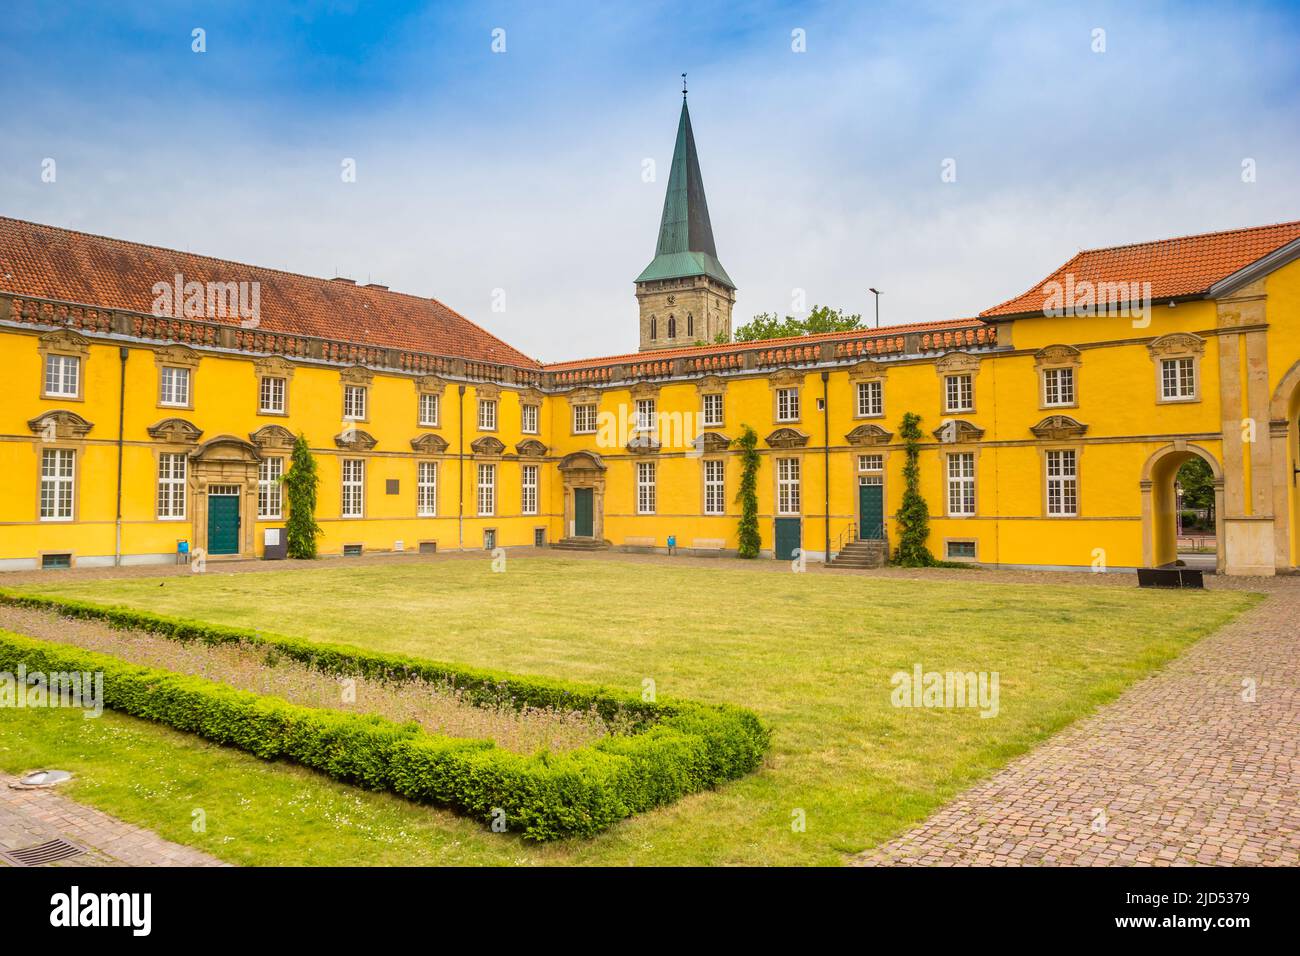 Church tower and courtyard of the castle in Osnabruck, Germany Stock Photo